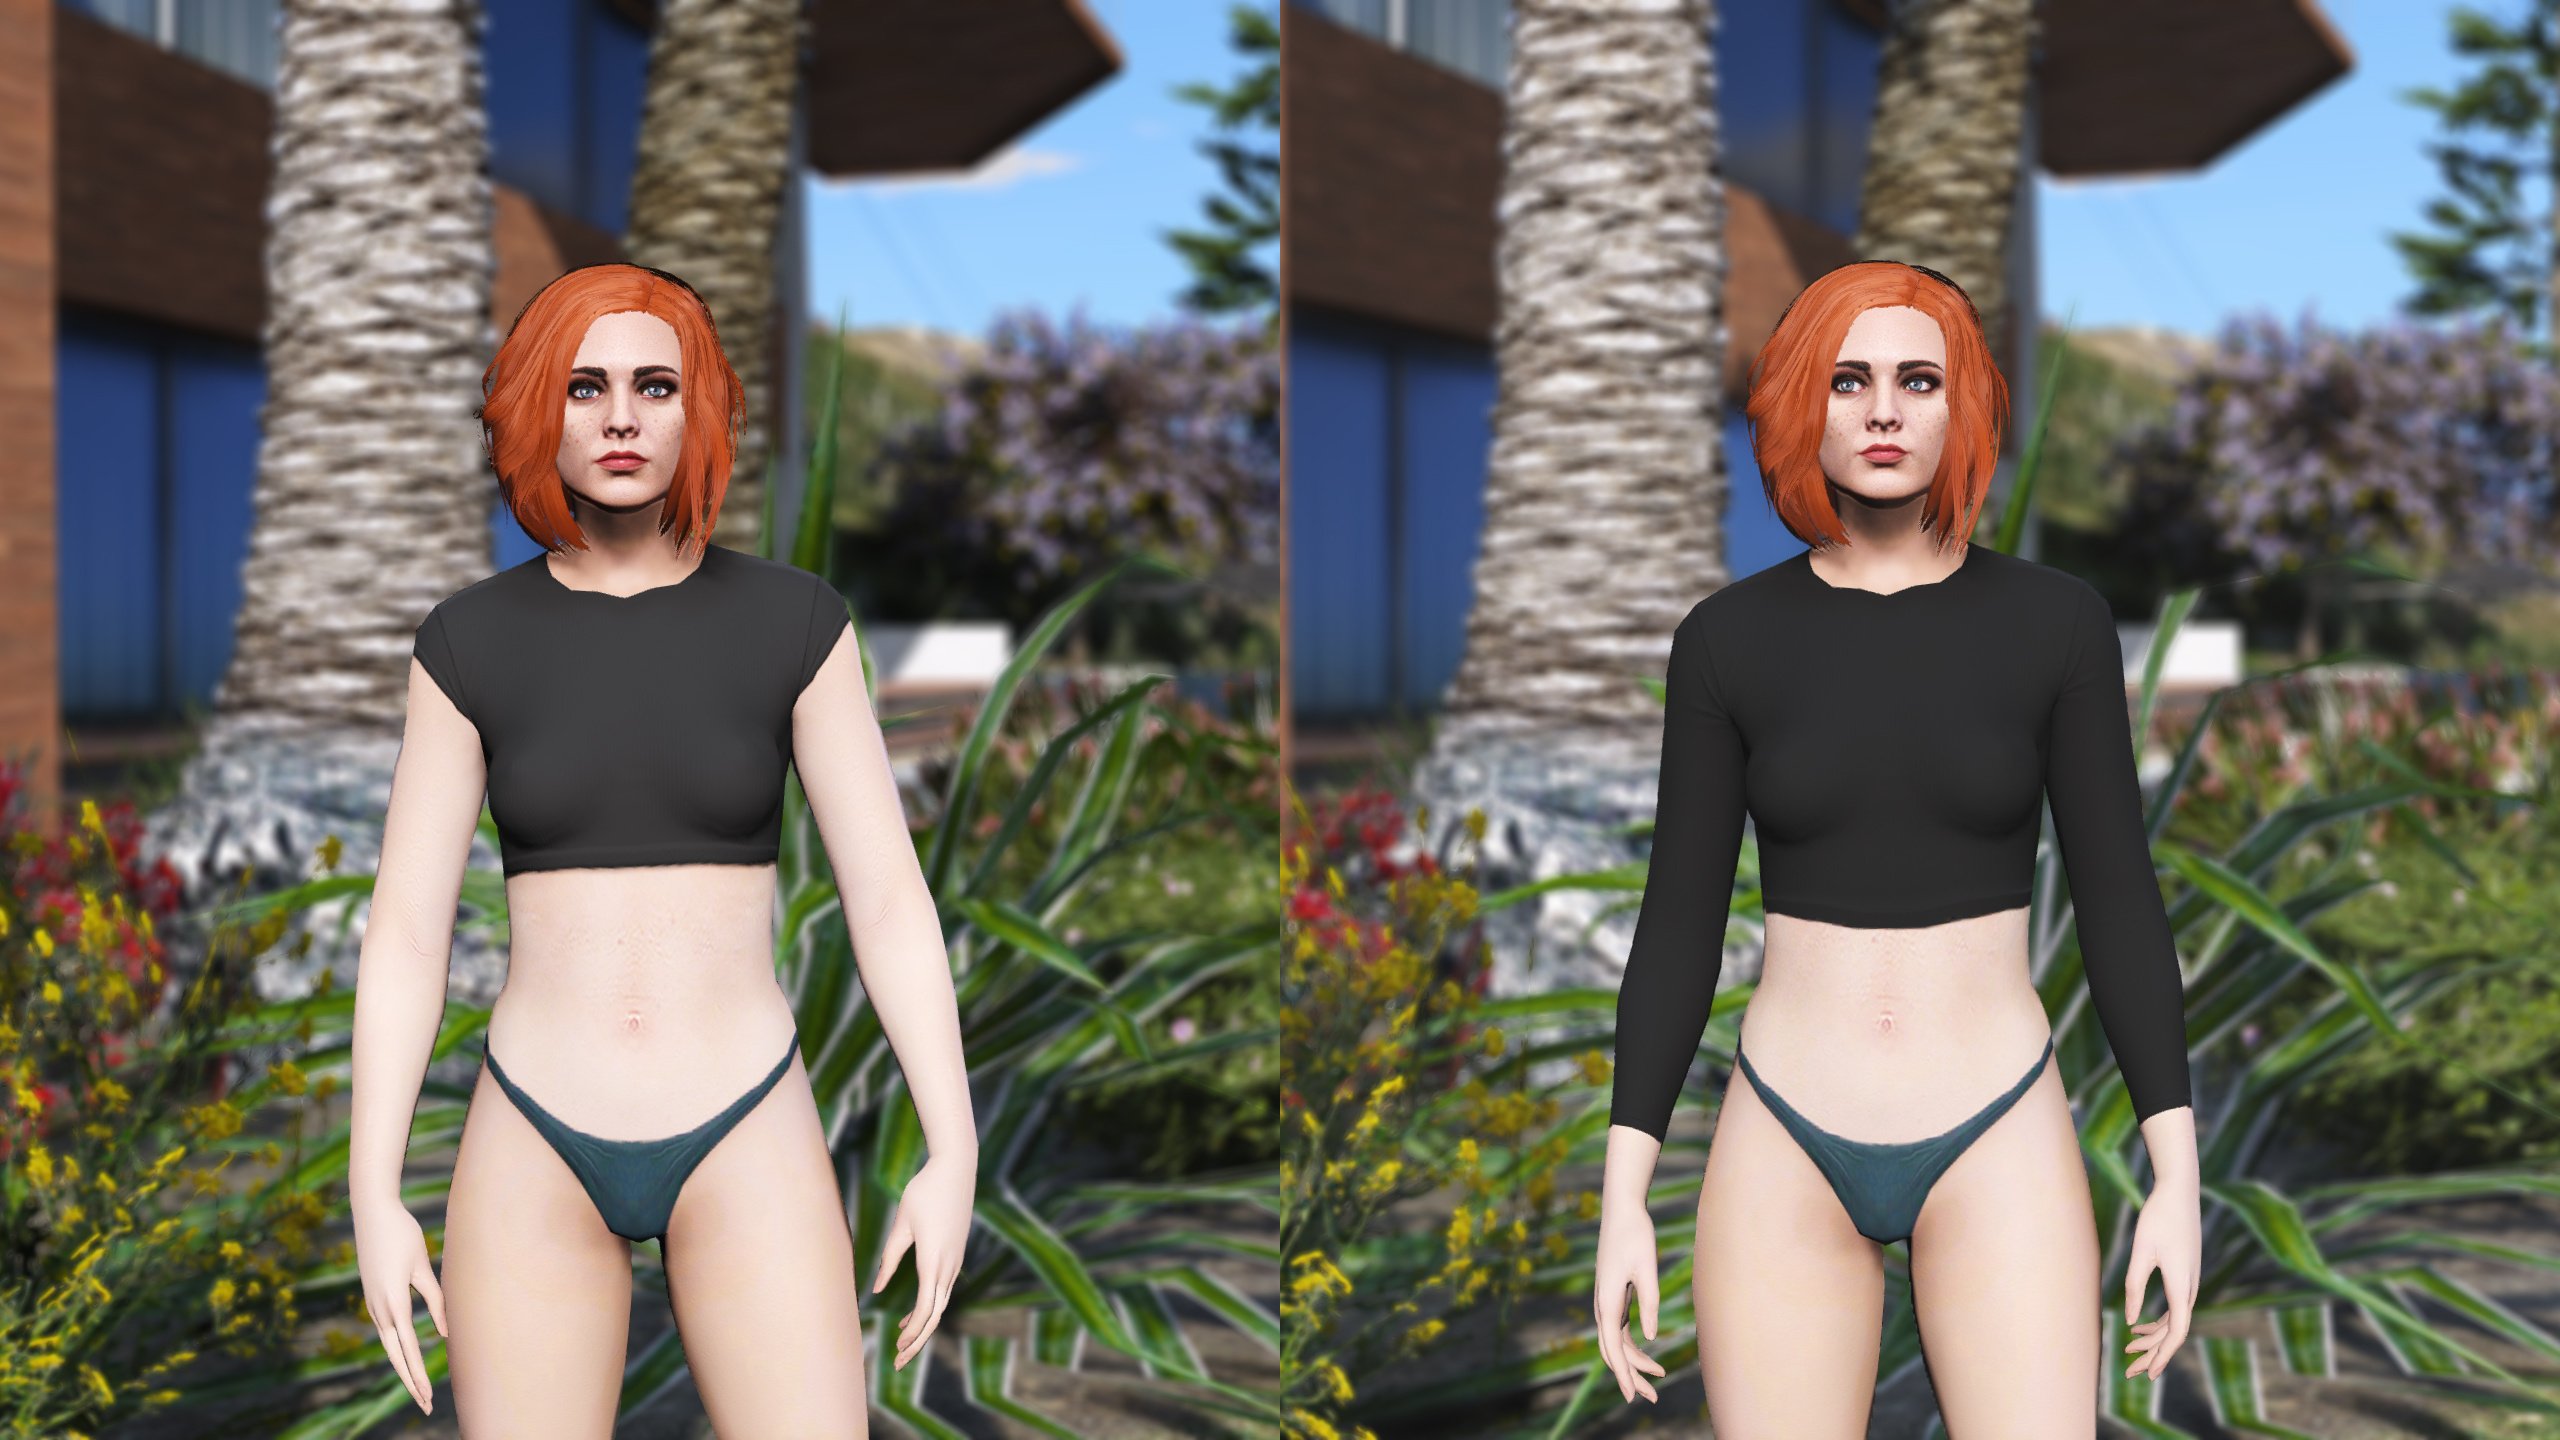 Bikini Pack (New Outfit) for MP Female.